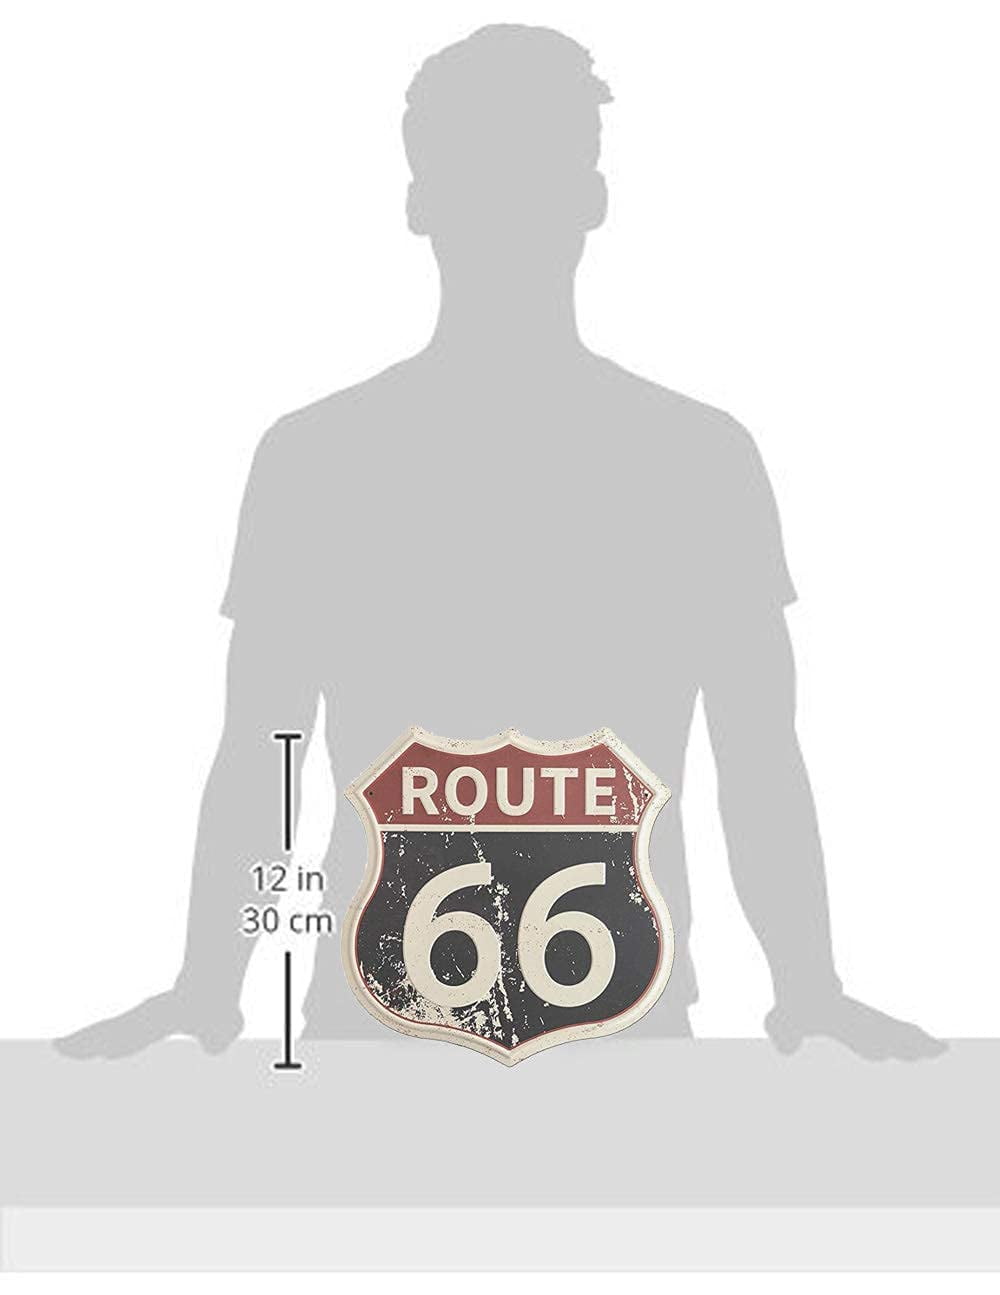 Route 66 SUDAGEN Route 66 Signs Vintage Road Signs with Polygon Metal Tin Sign for Wall Decor Art 12 x 12